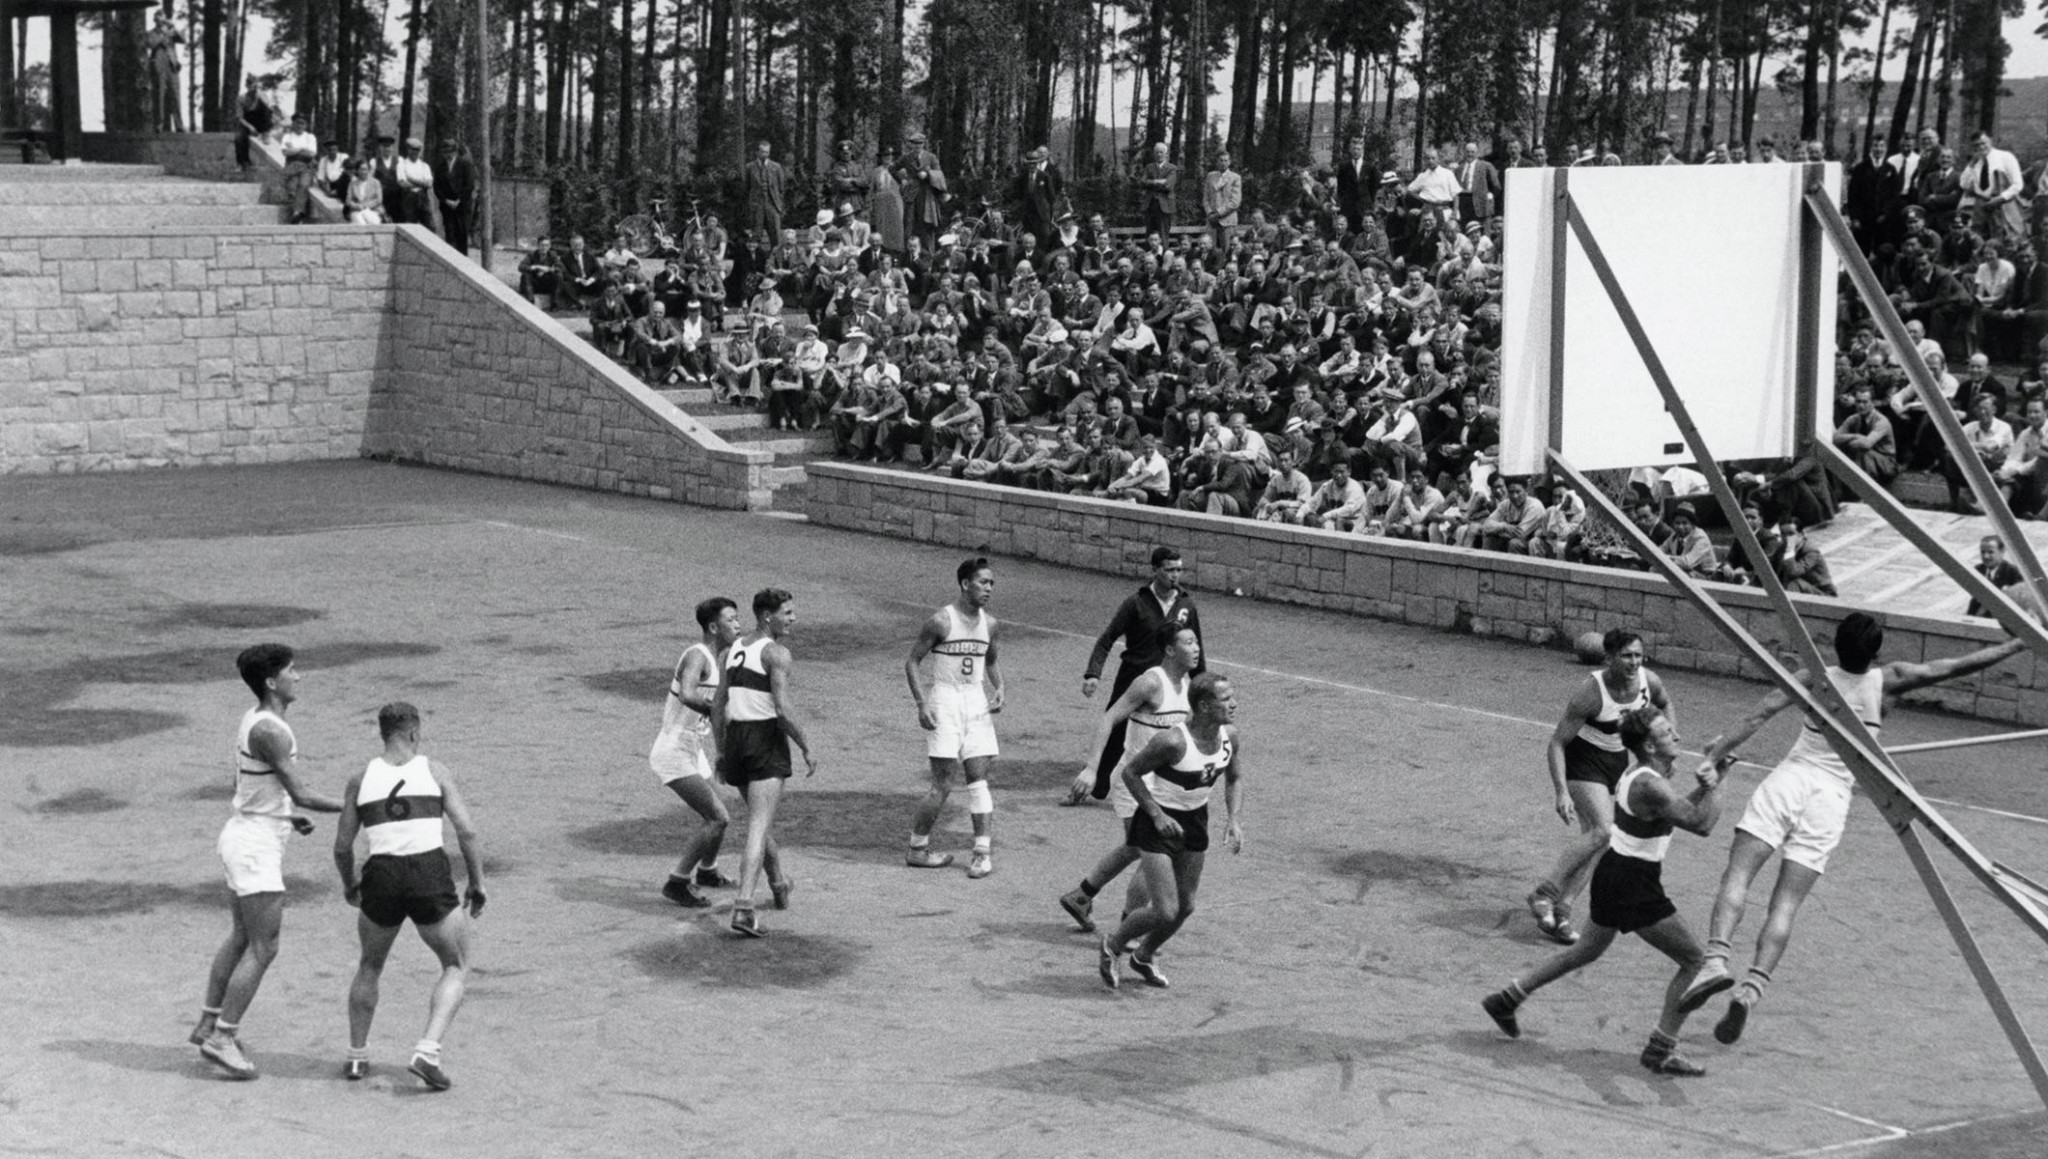 The first full Olympic basketball competition at the 1936 Berlin Games took place outdoors on sand and clay tennis courts ©Getty Images